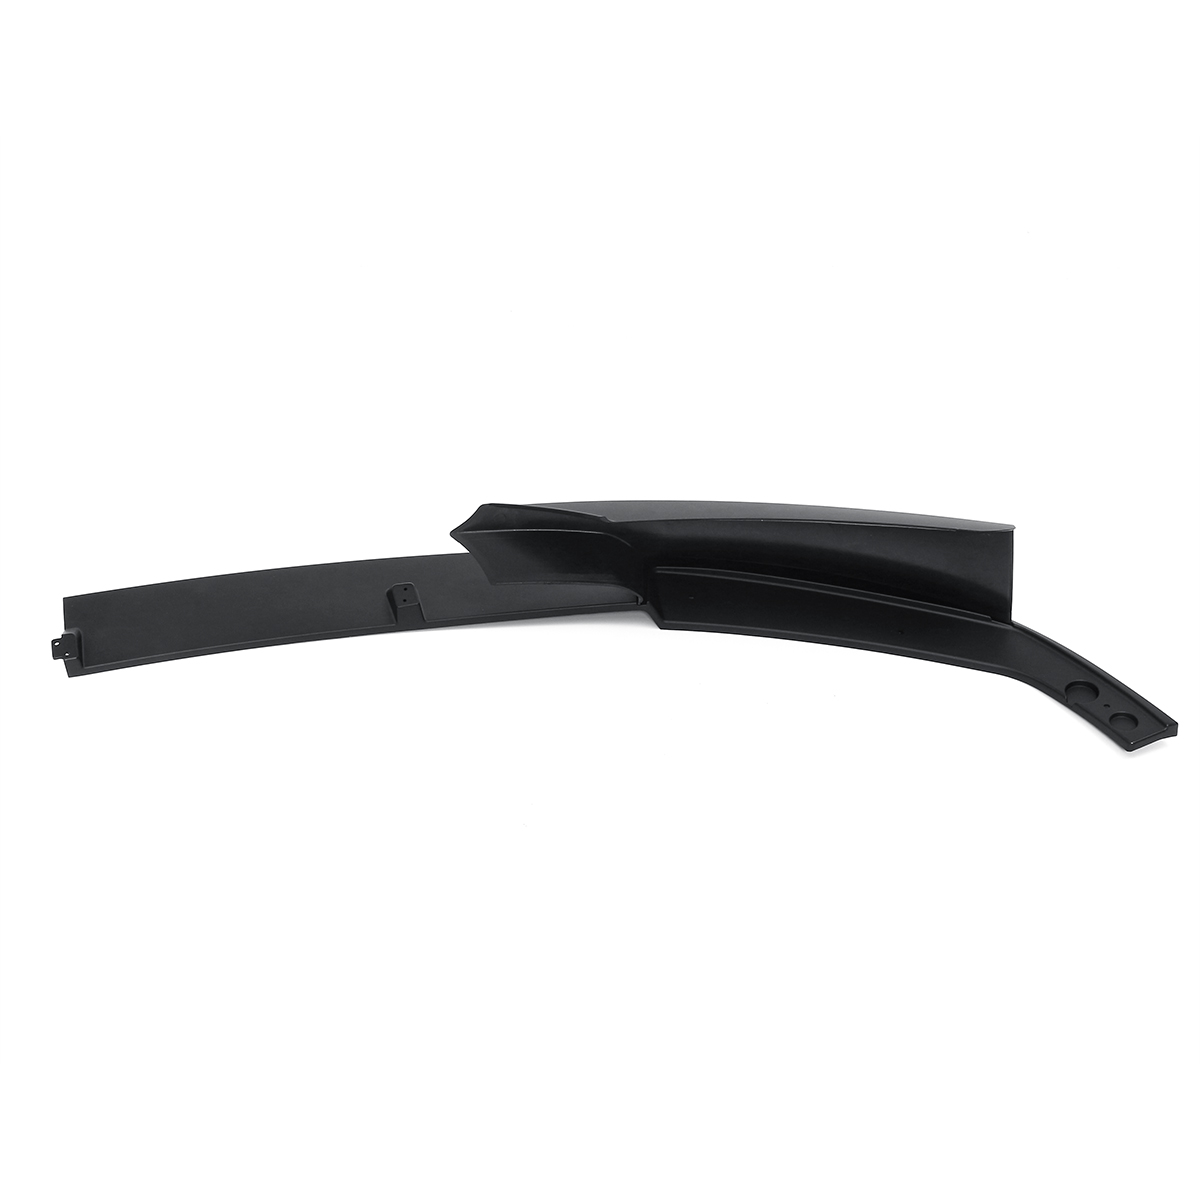 2-x-Matte-Black-Surface-Front-Bumper-Cover-Protector-Splitter-Lip-For-BMW-F30-3-Series-M-Style-12-18-1578471